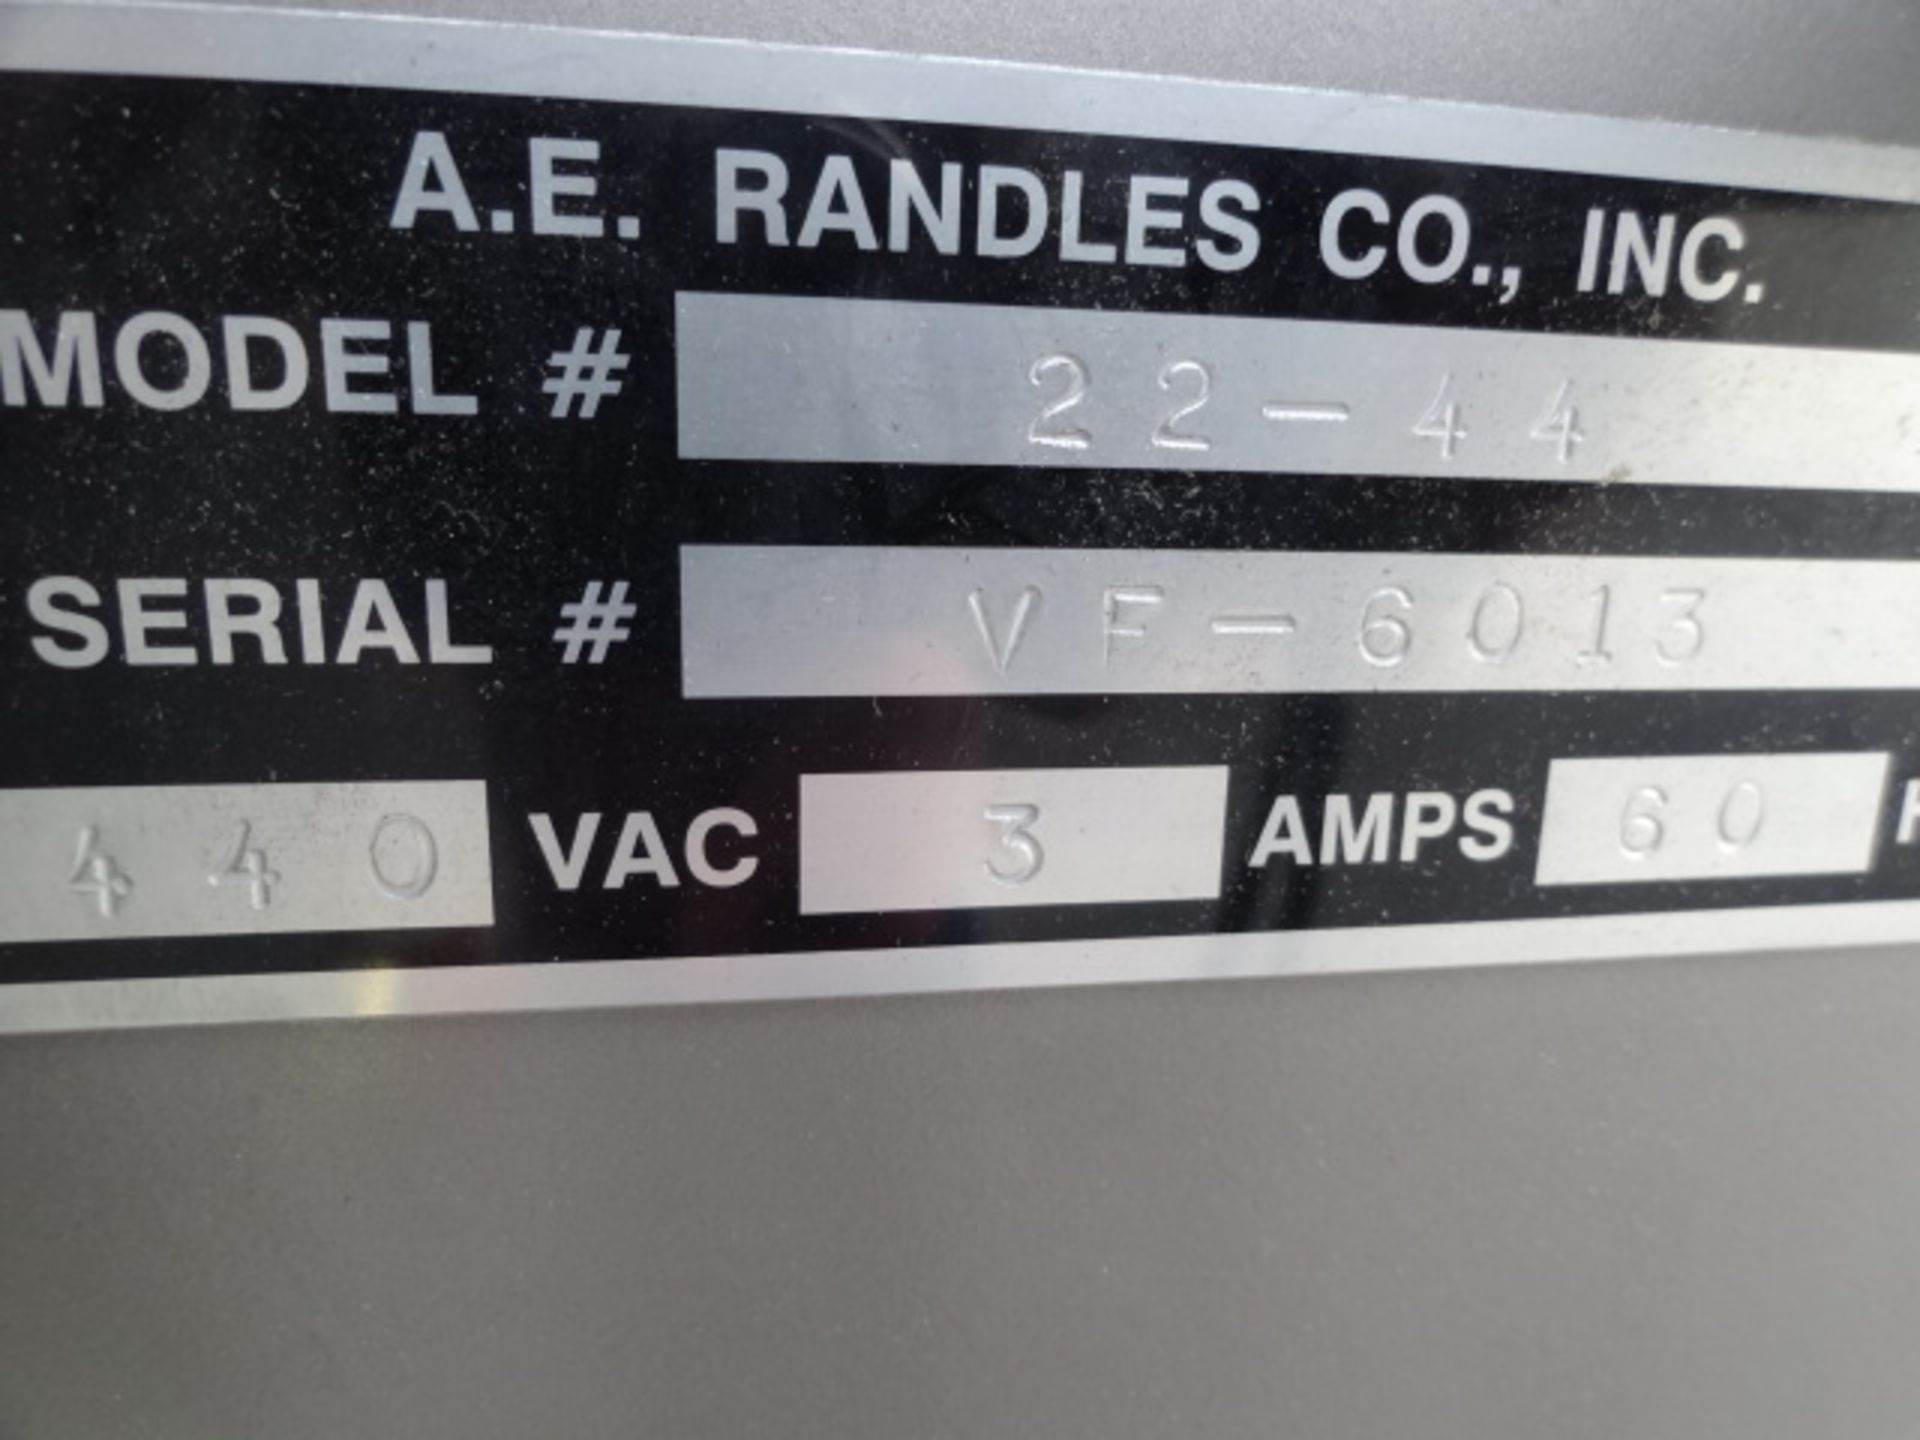 AE Randles Tray Former, Model # 22-44, S/N VF-6013, single forming head for self-locking style - Image 5 of 5